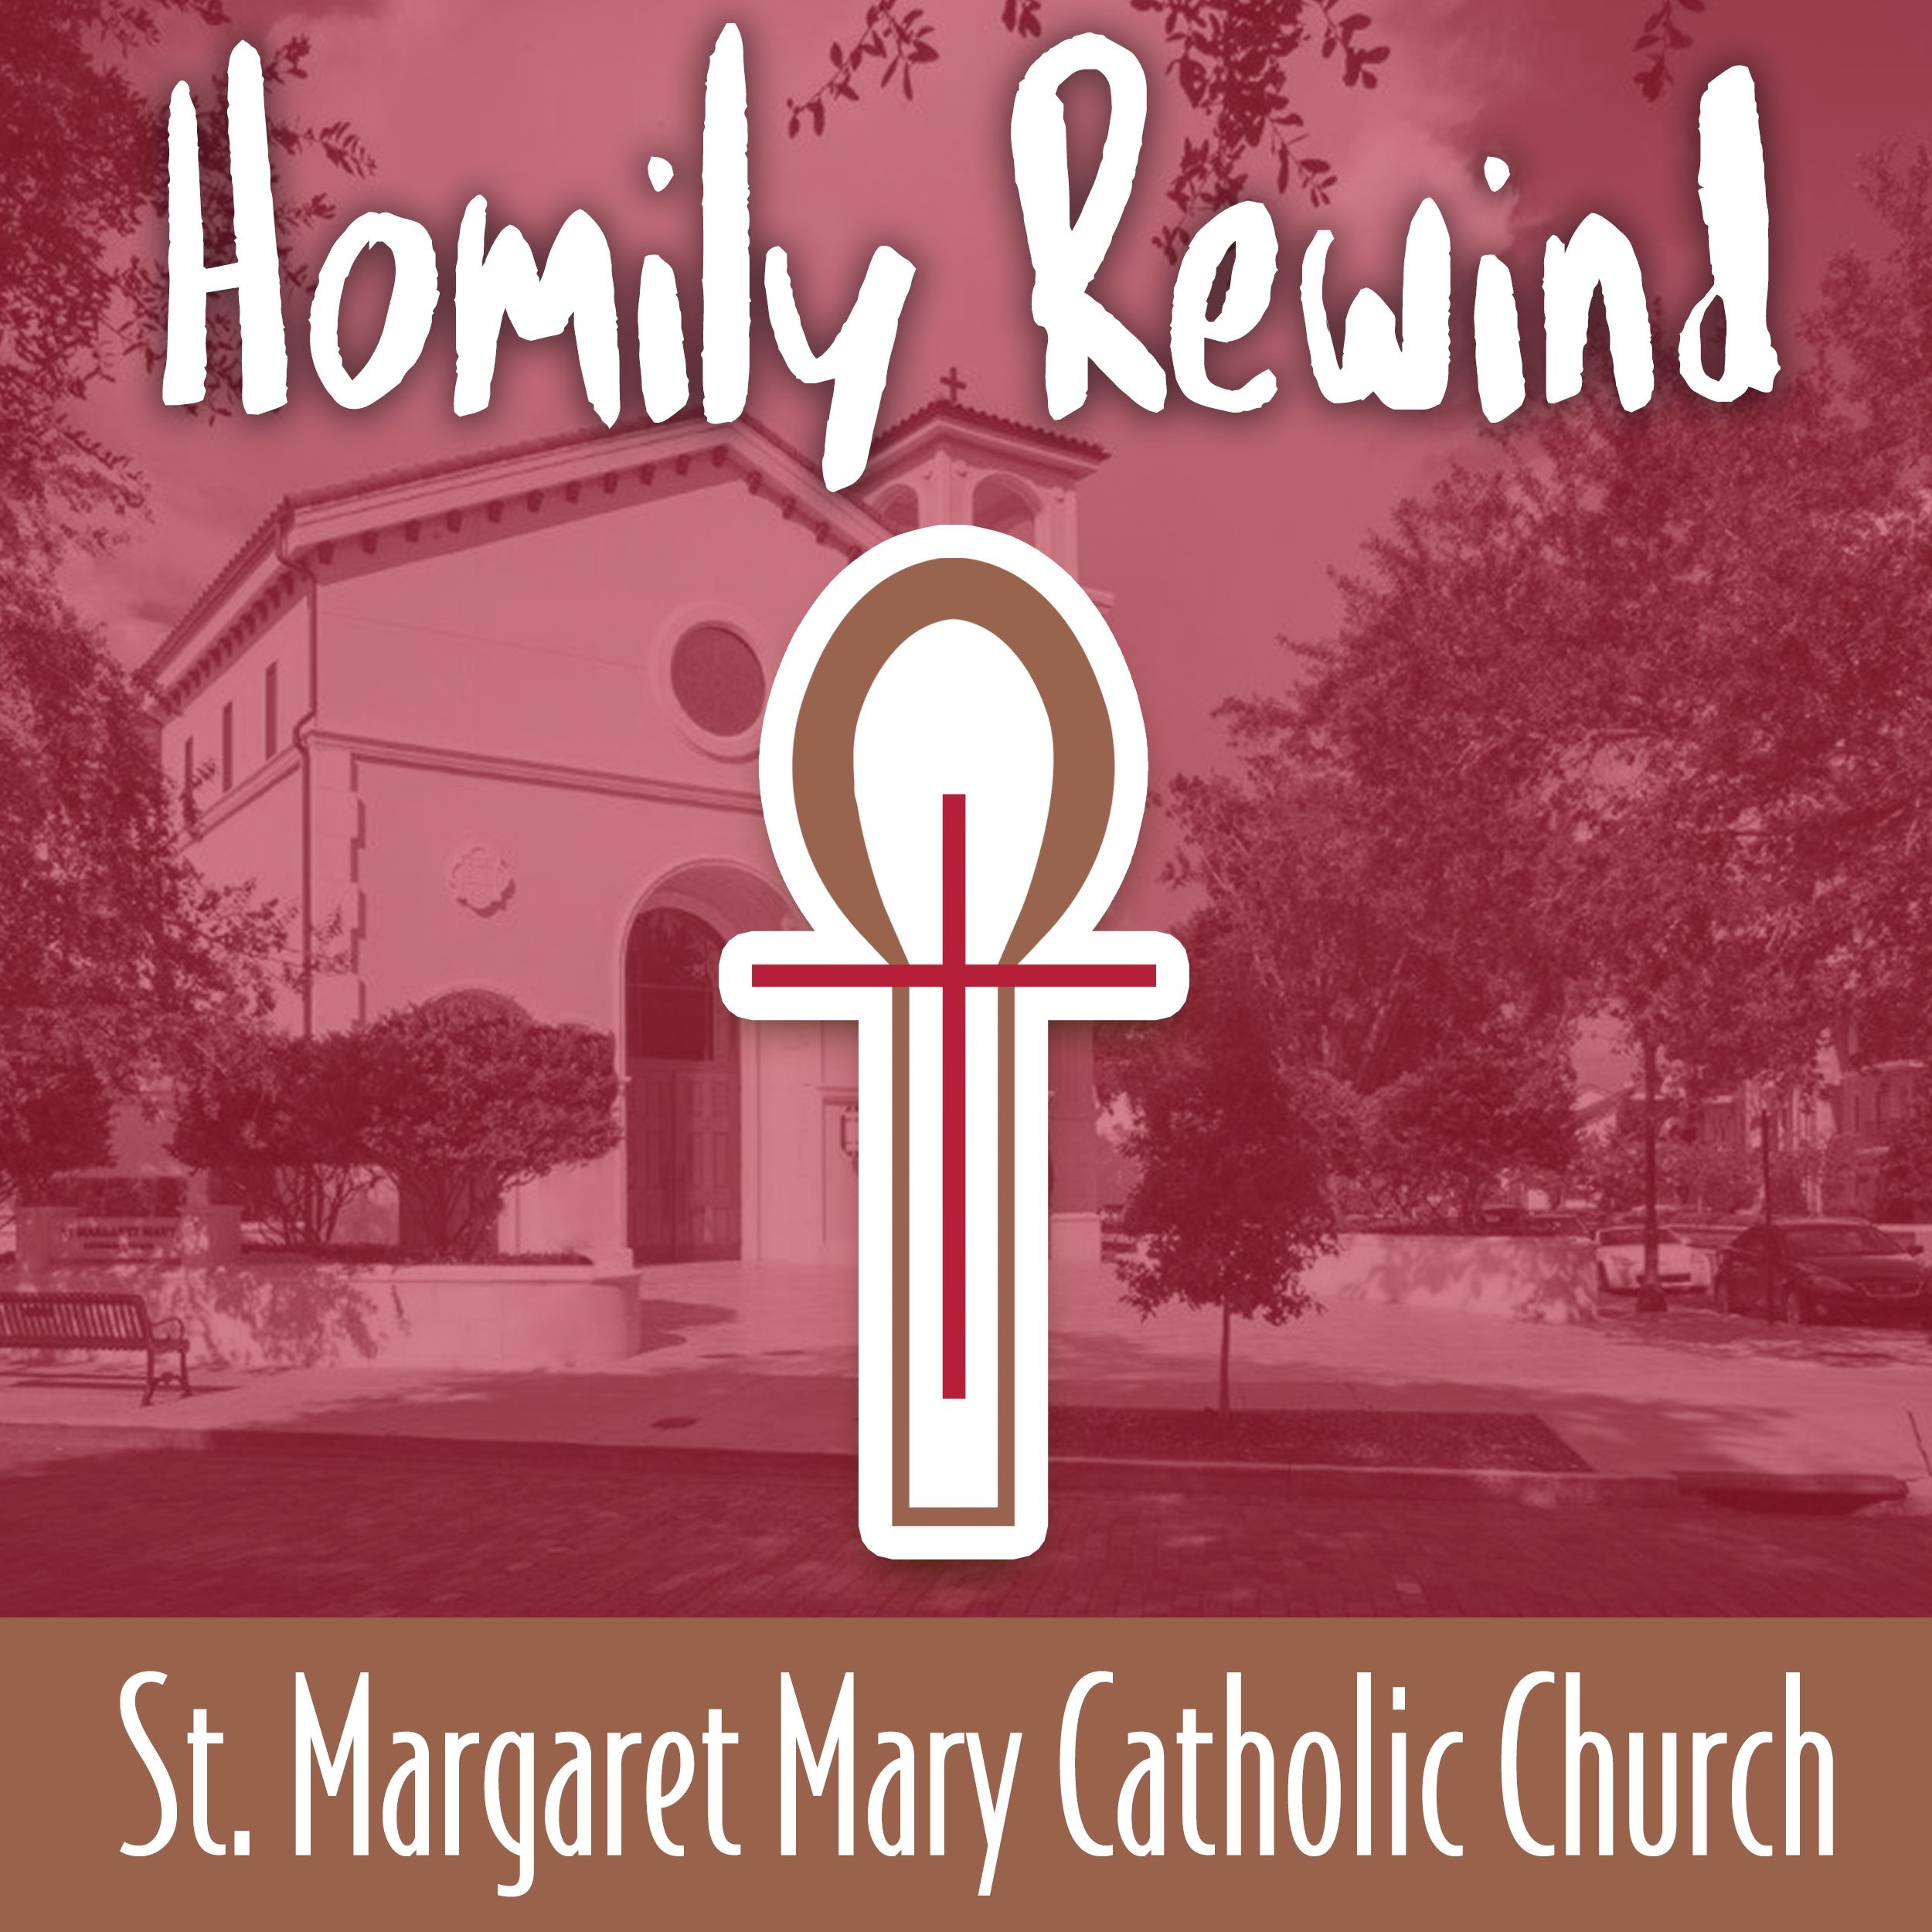 Palm Sunday Reading of the Passion Homily Rewind from St. Margaret